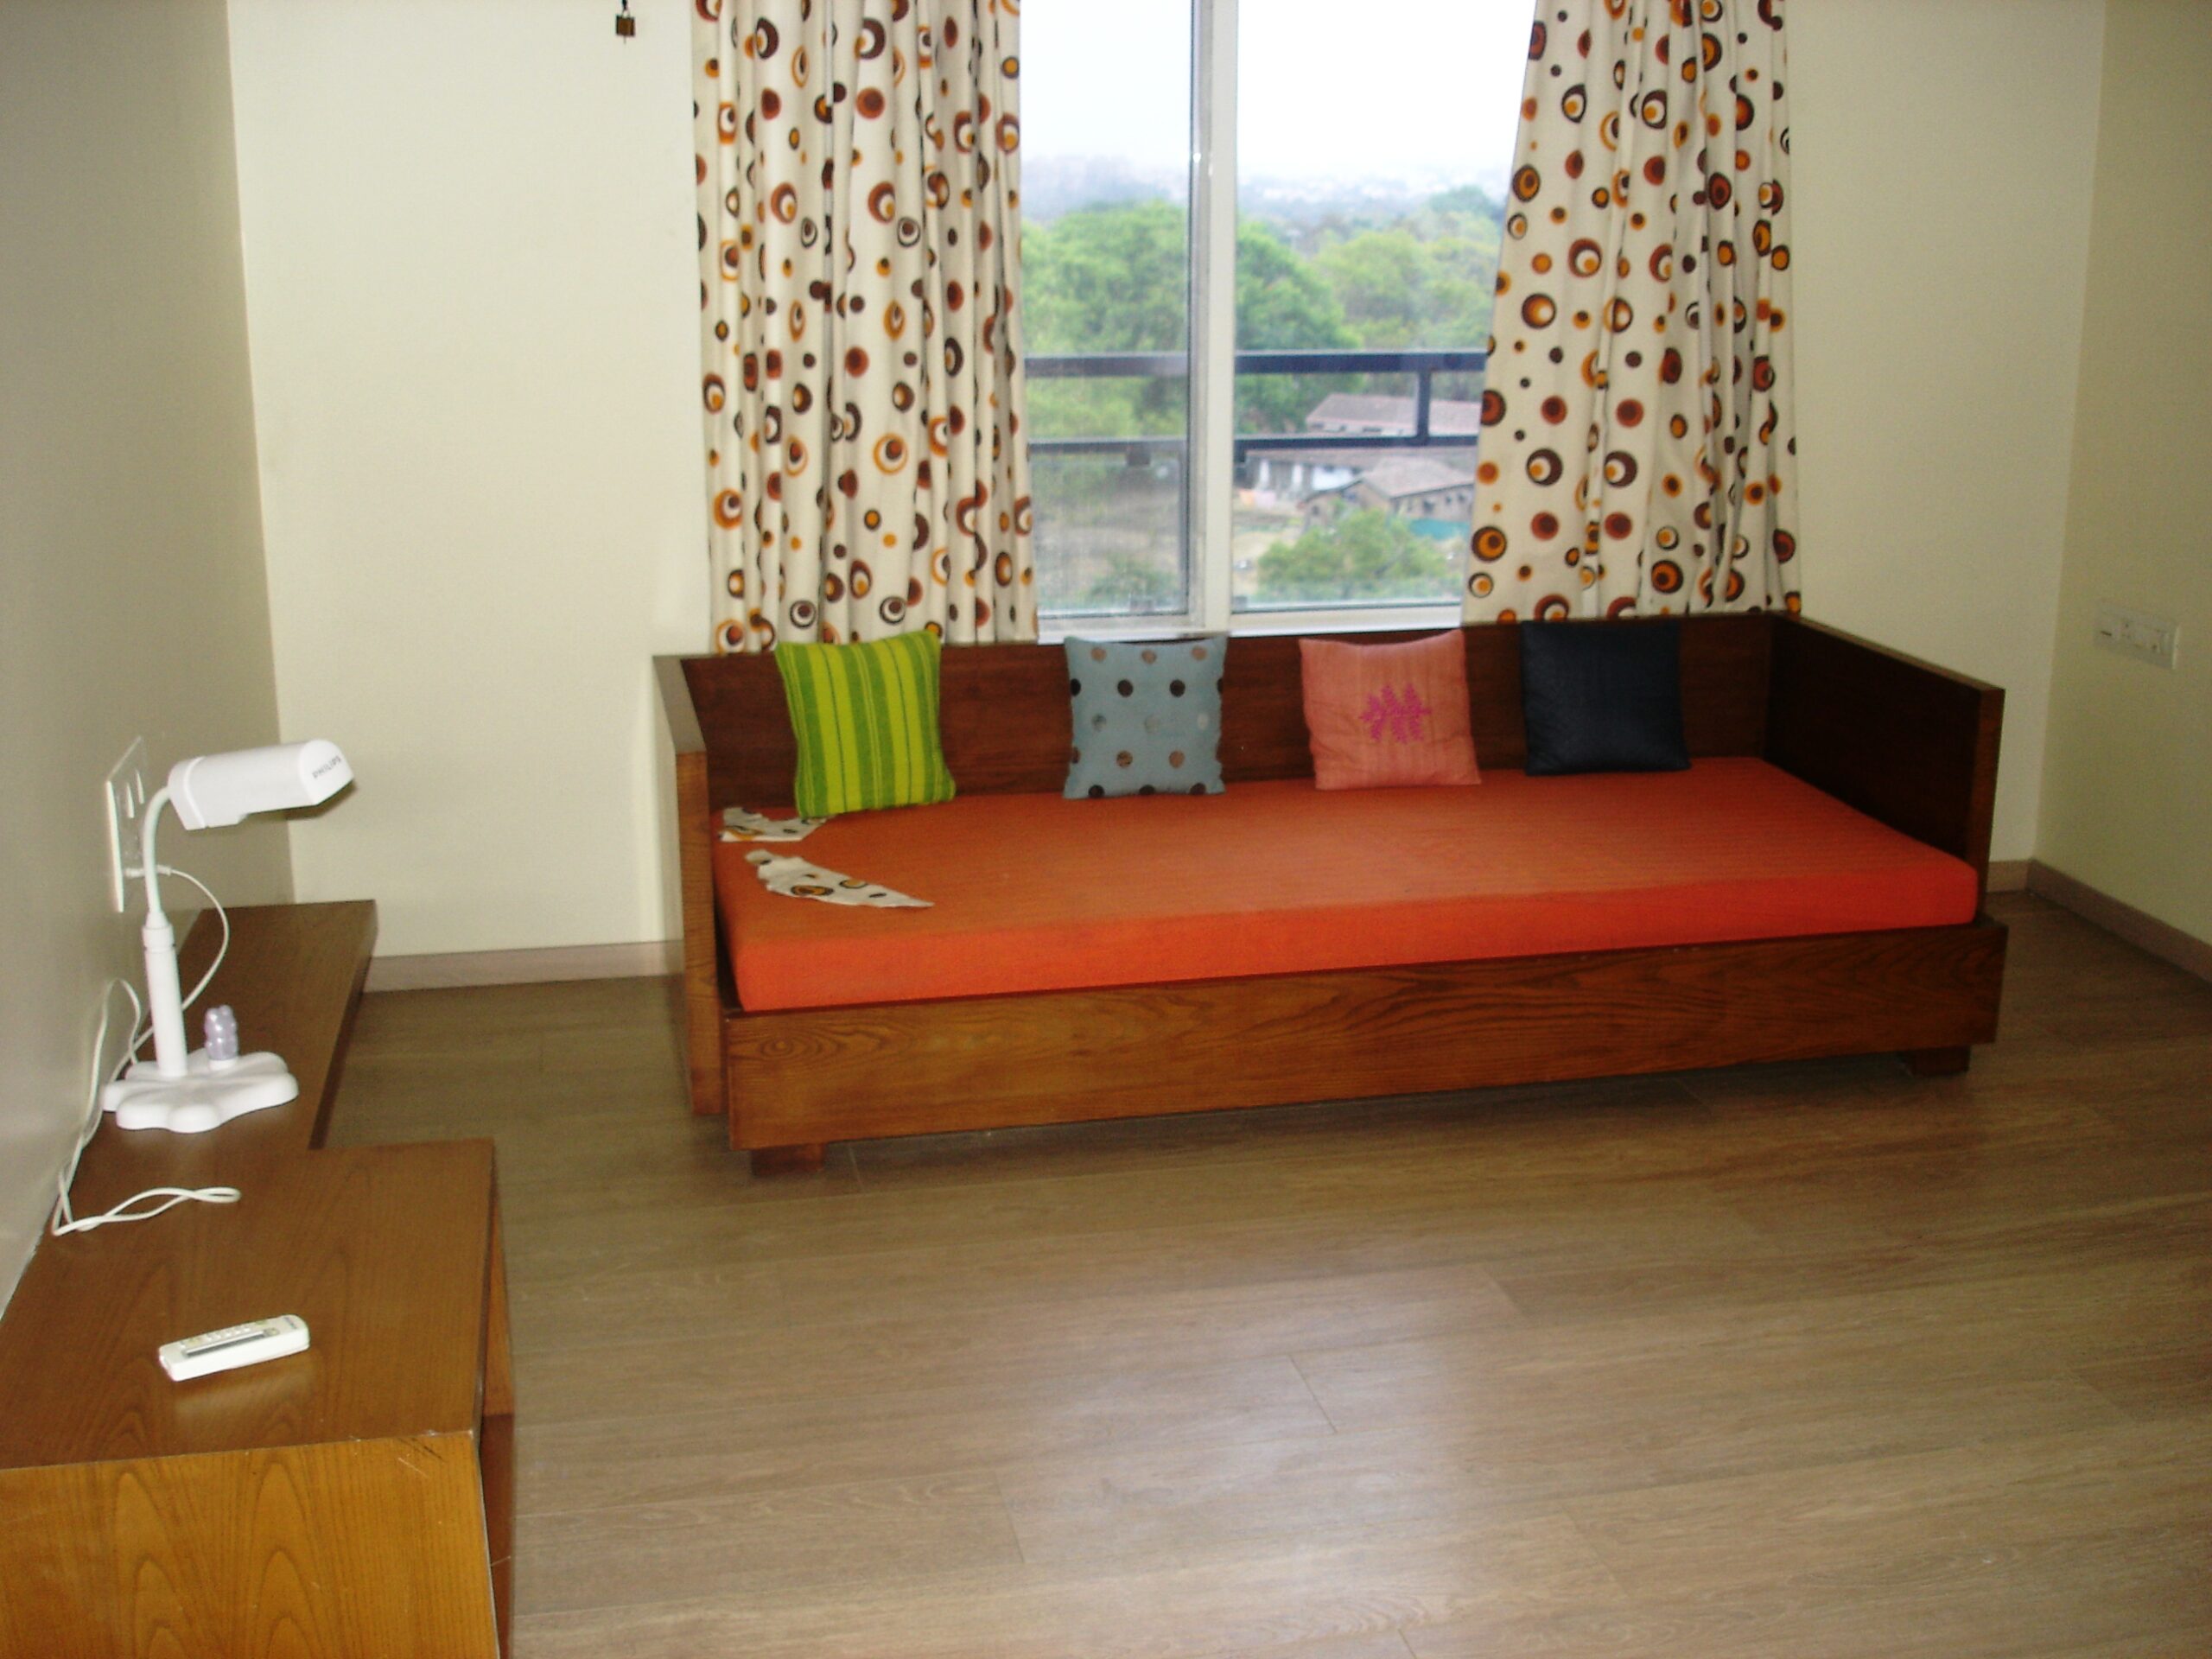 Spacious 4BHK Apartments in Koregaon Park Pune for Sale